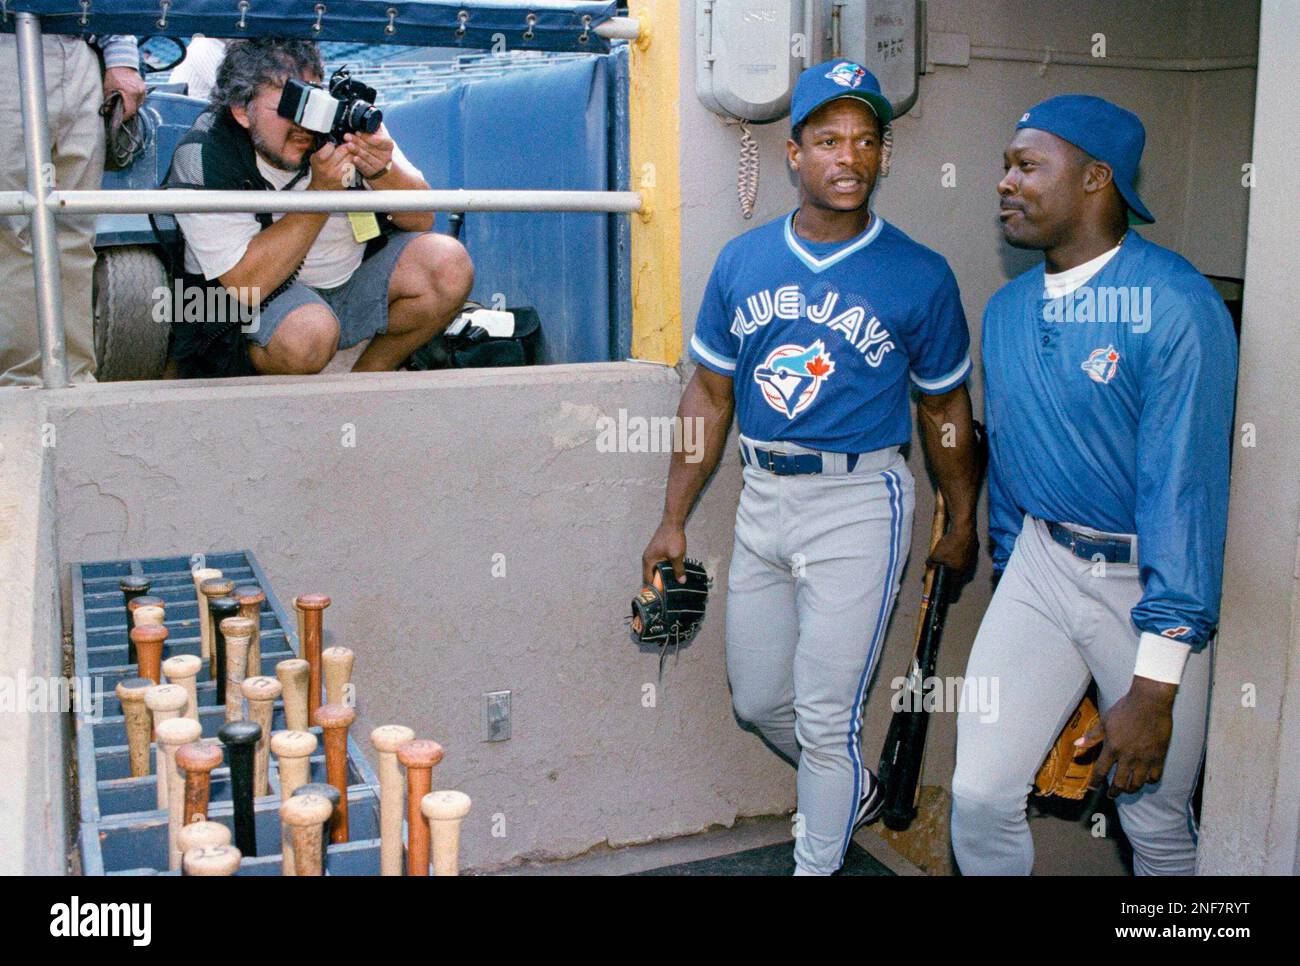 Toronto Blue Jays Rickey Henderson hit a home run off Oakland Athletics  pitcher Ron Darling as A's catcher Scott Hemond watches the play in the  fifth inning at Oakland, Aug. 30, 1993.